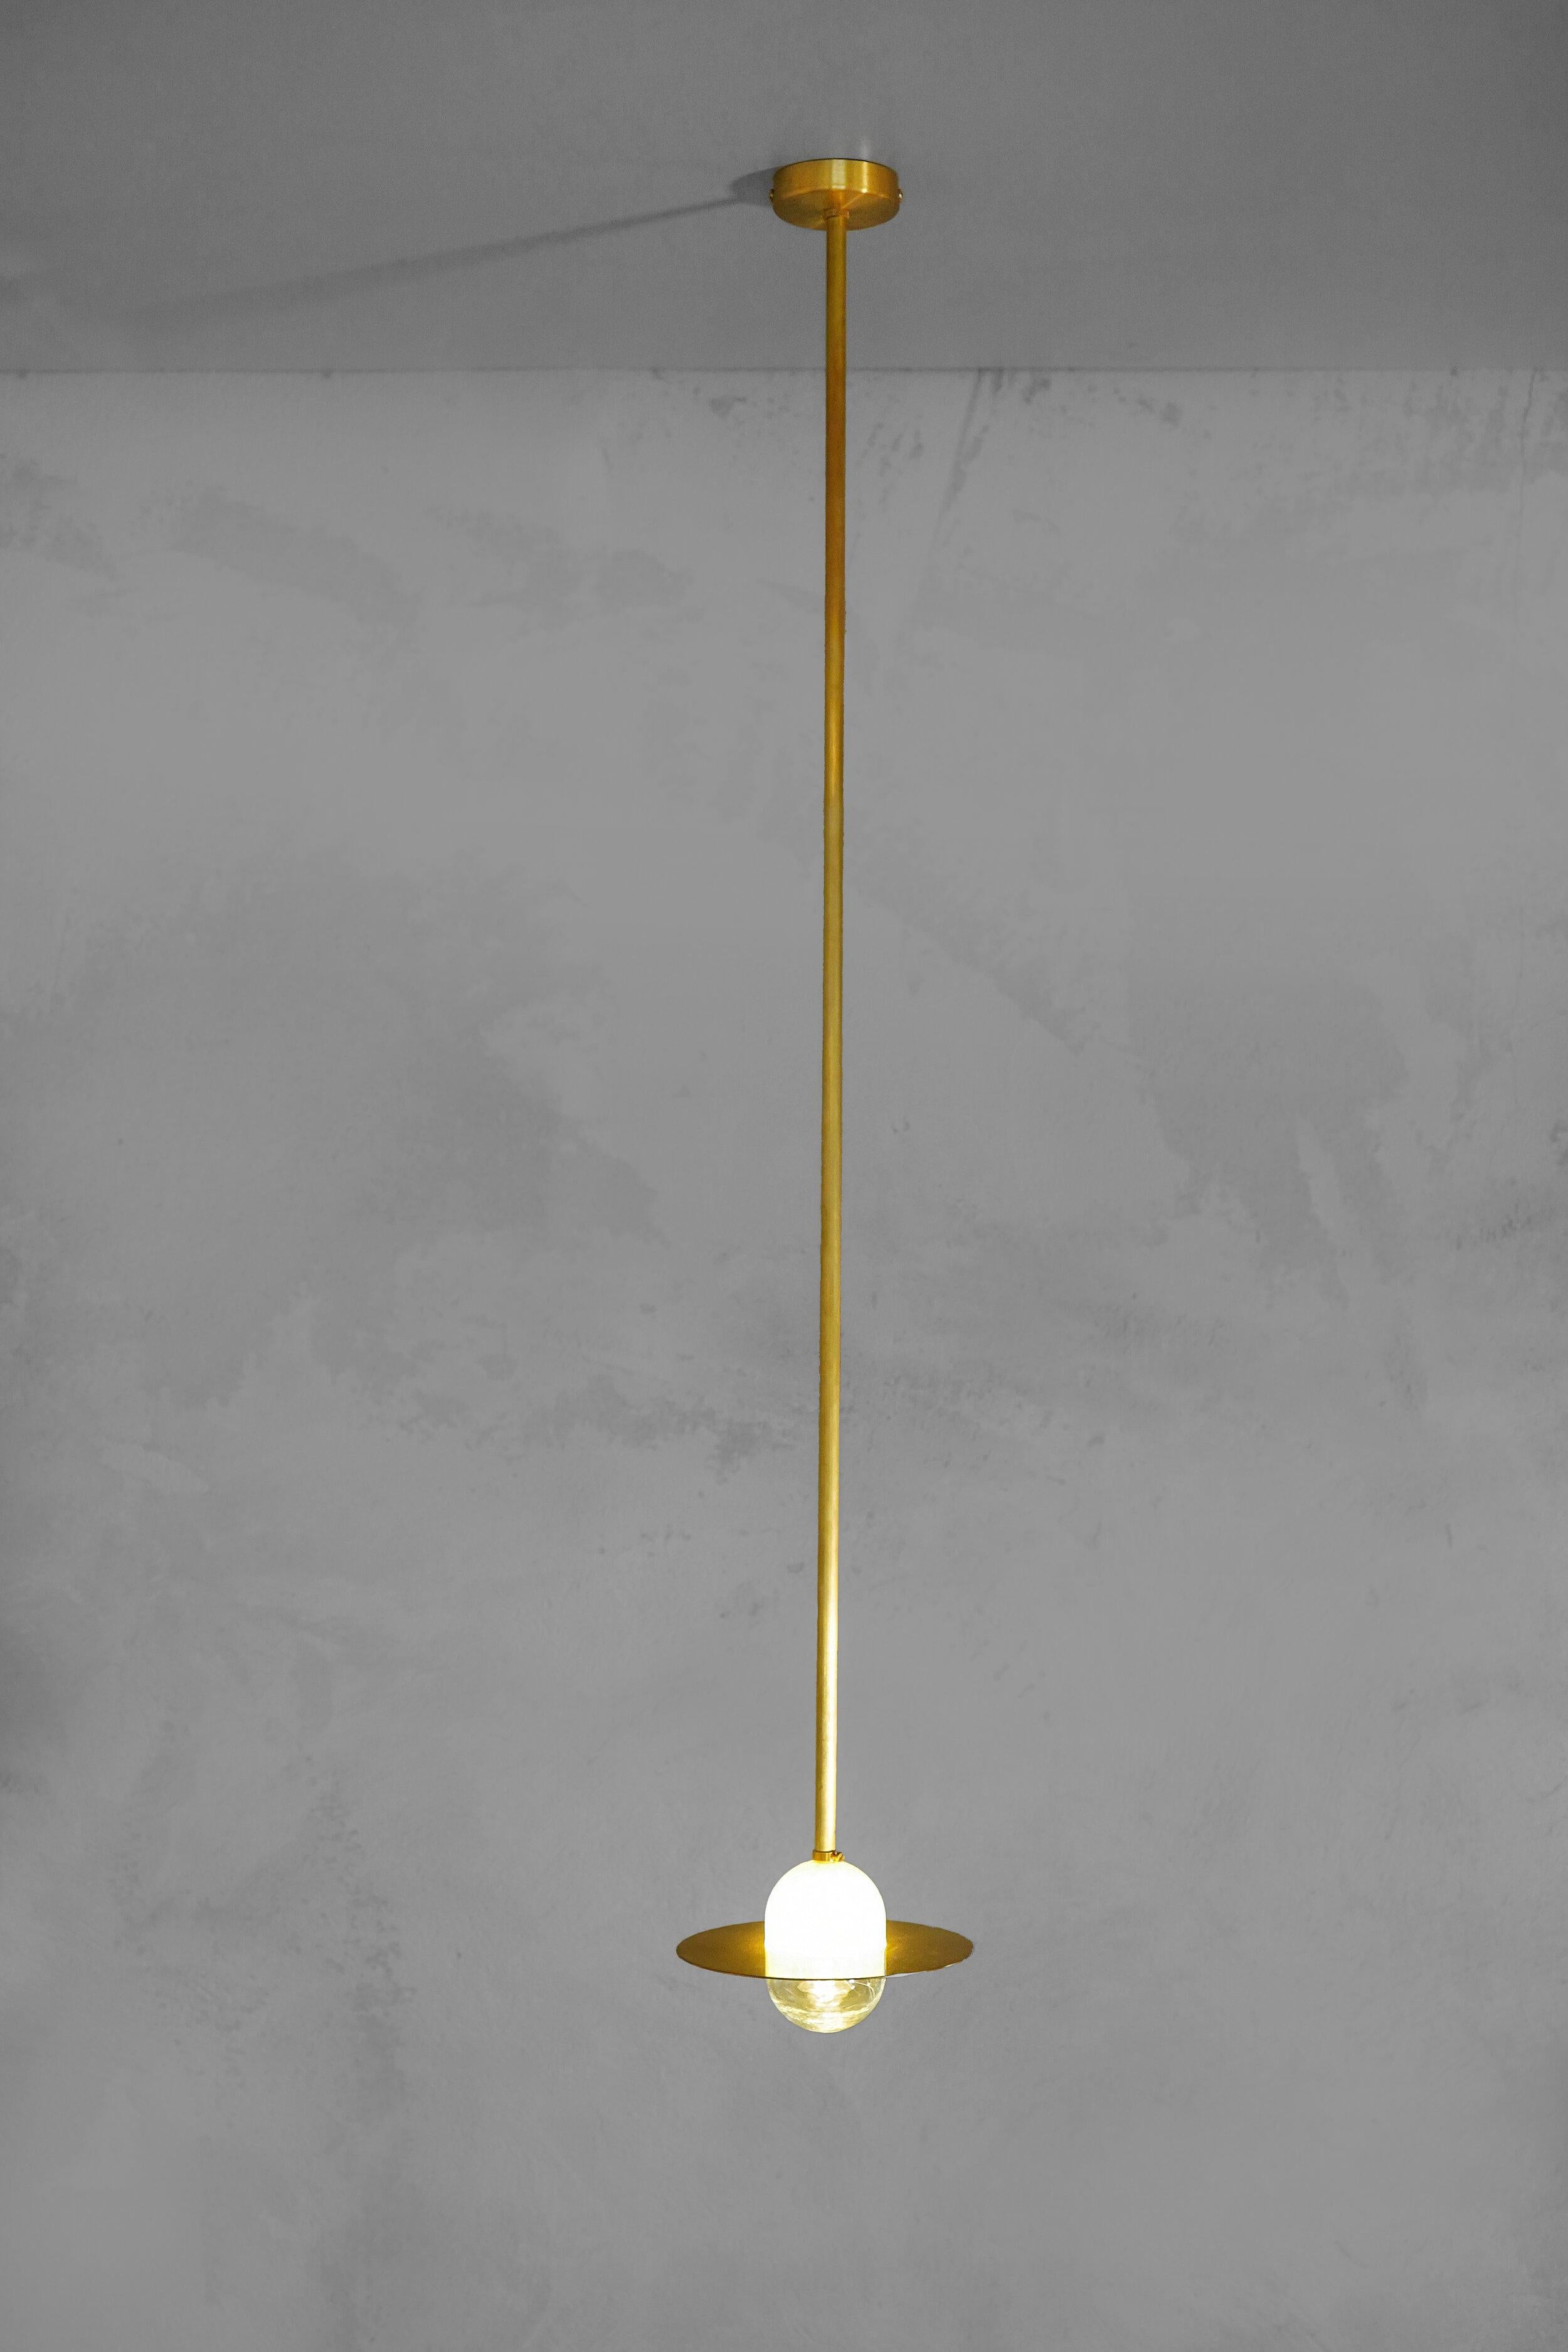 Alba pendant tube by Contain.
Dimensions: D 15 x W 15 H 100 cm (custom length).
Materials: brass, 3D printed PLA structure and optical lens.
Also available in different finishes.

All our lamps can be wired according to each country. If sold to